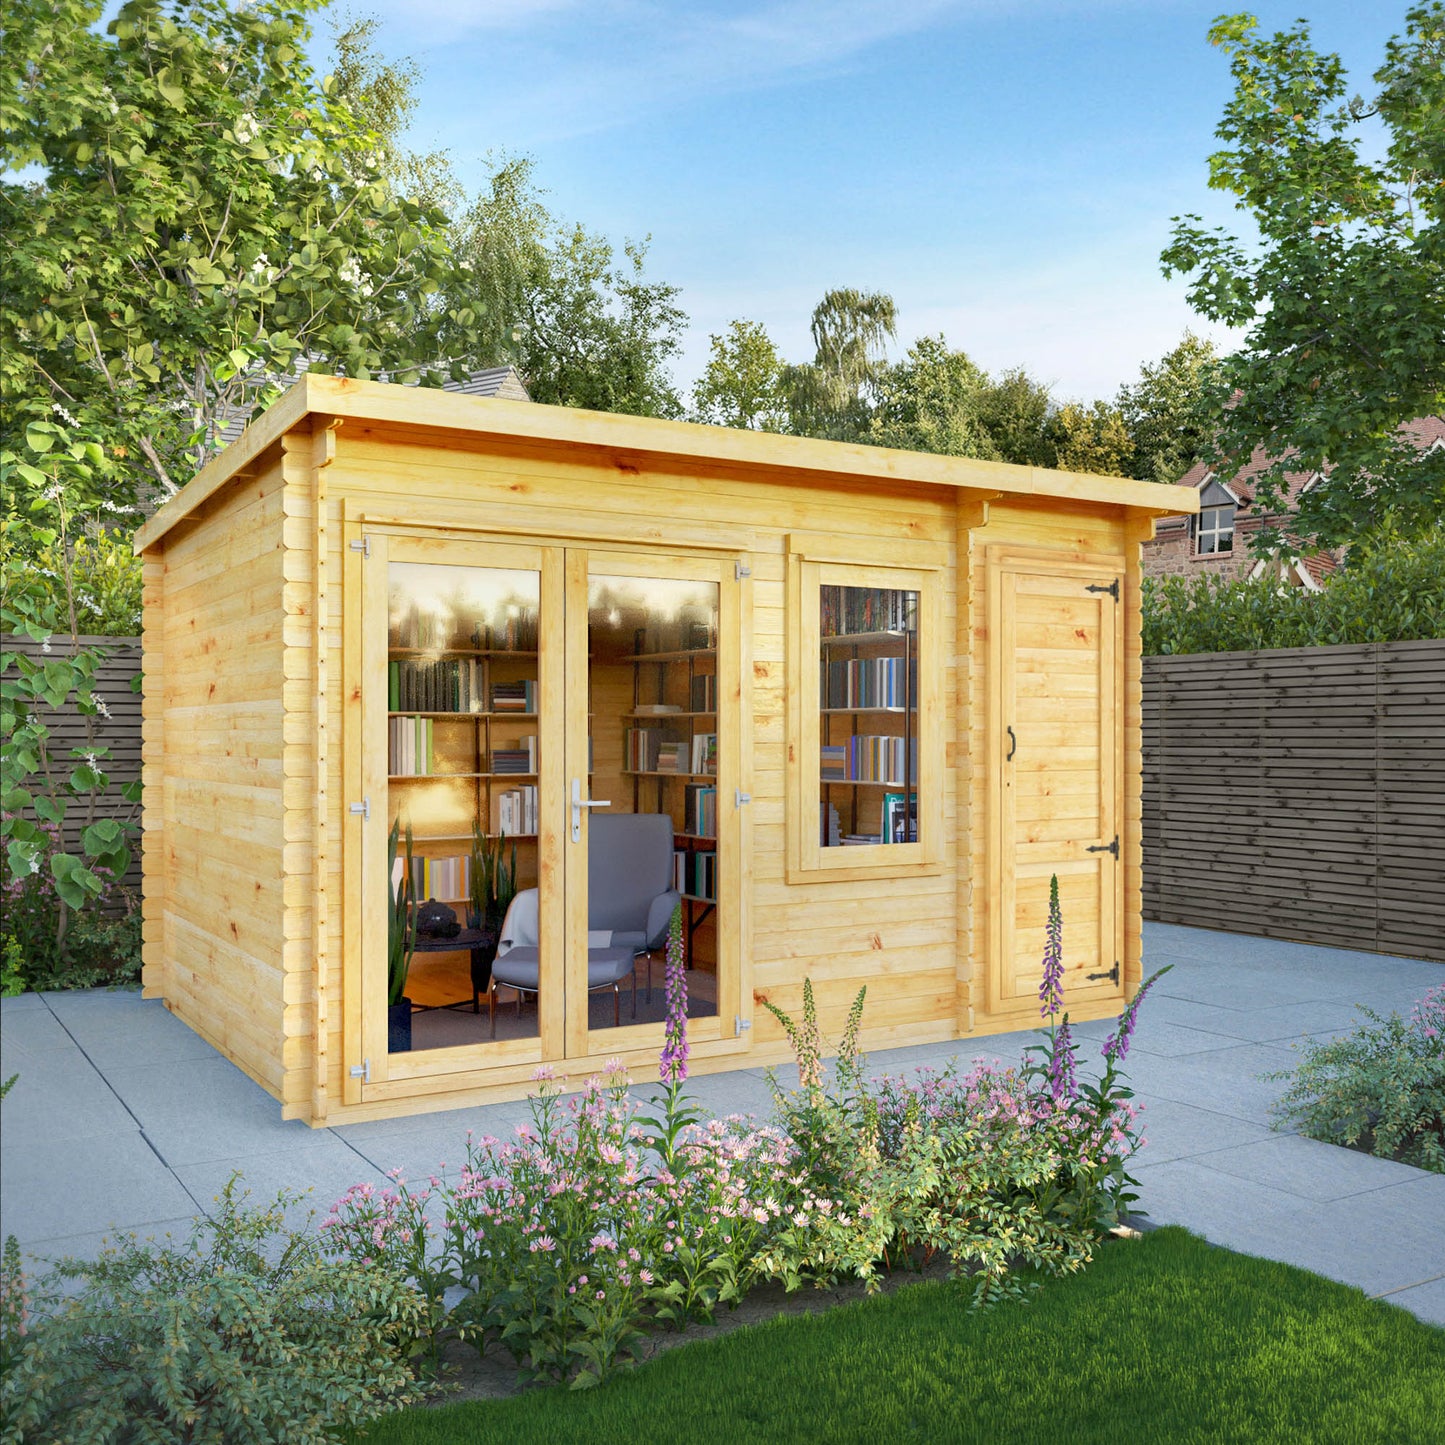 The 4.1m x 3m Cuckoo Pent Log Cabin with Side Shed